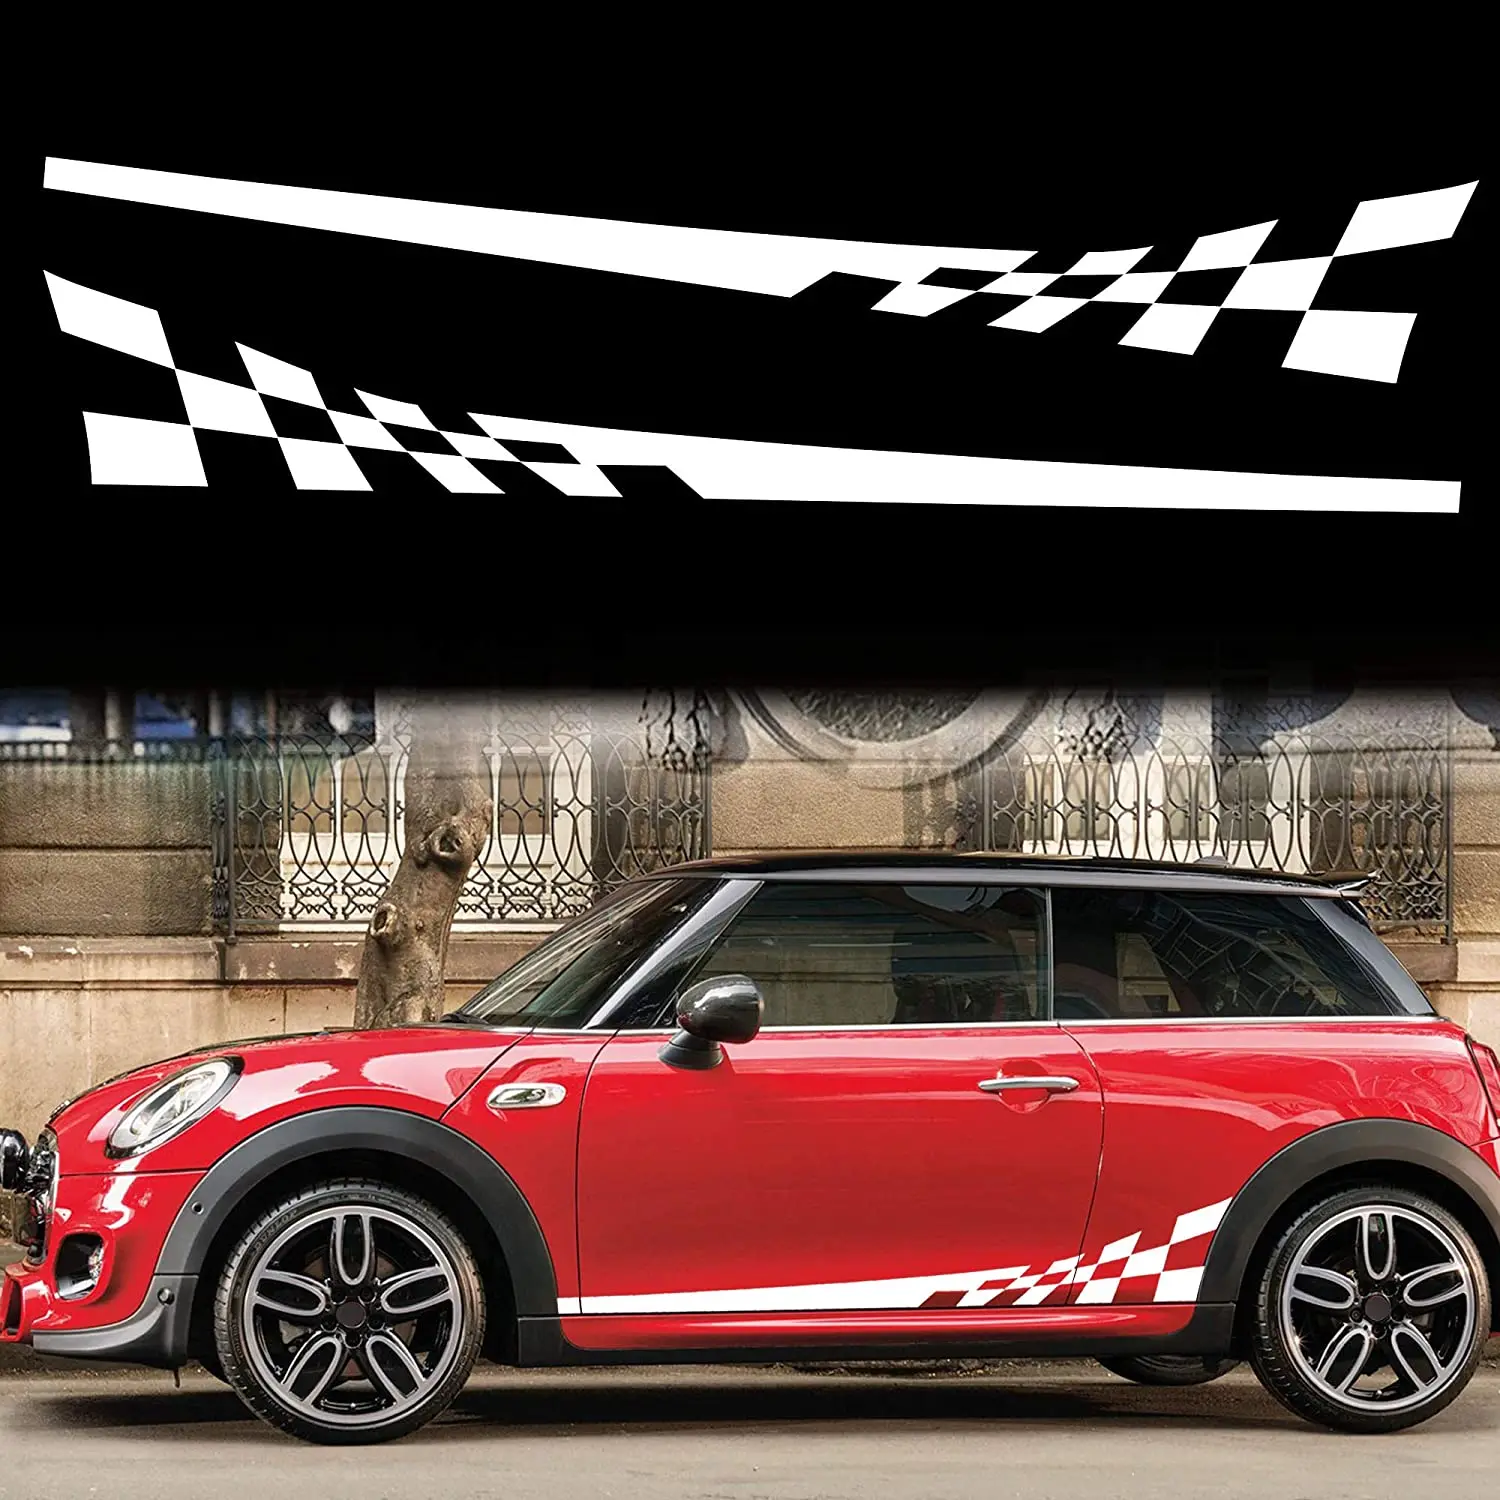 

TOMALL 1 Pair 77.2'' Racing Checkered Flag Side Stripe Decals Compatible with Mini Cooper Lattice Grid Stripe Graphic Waterproof